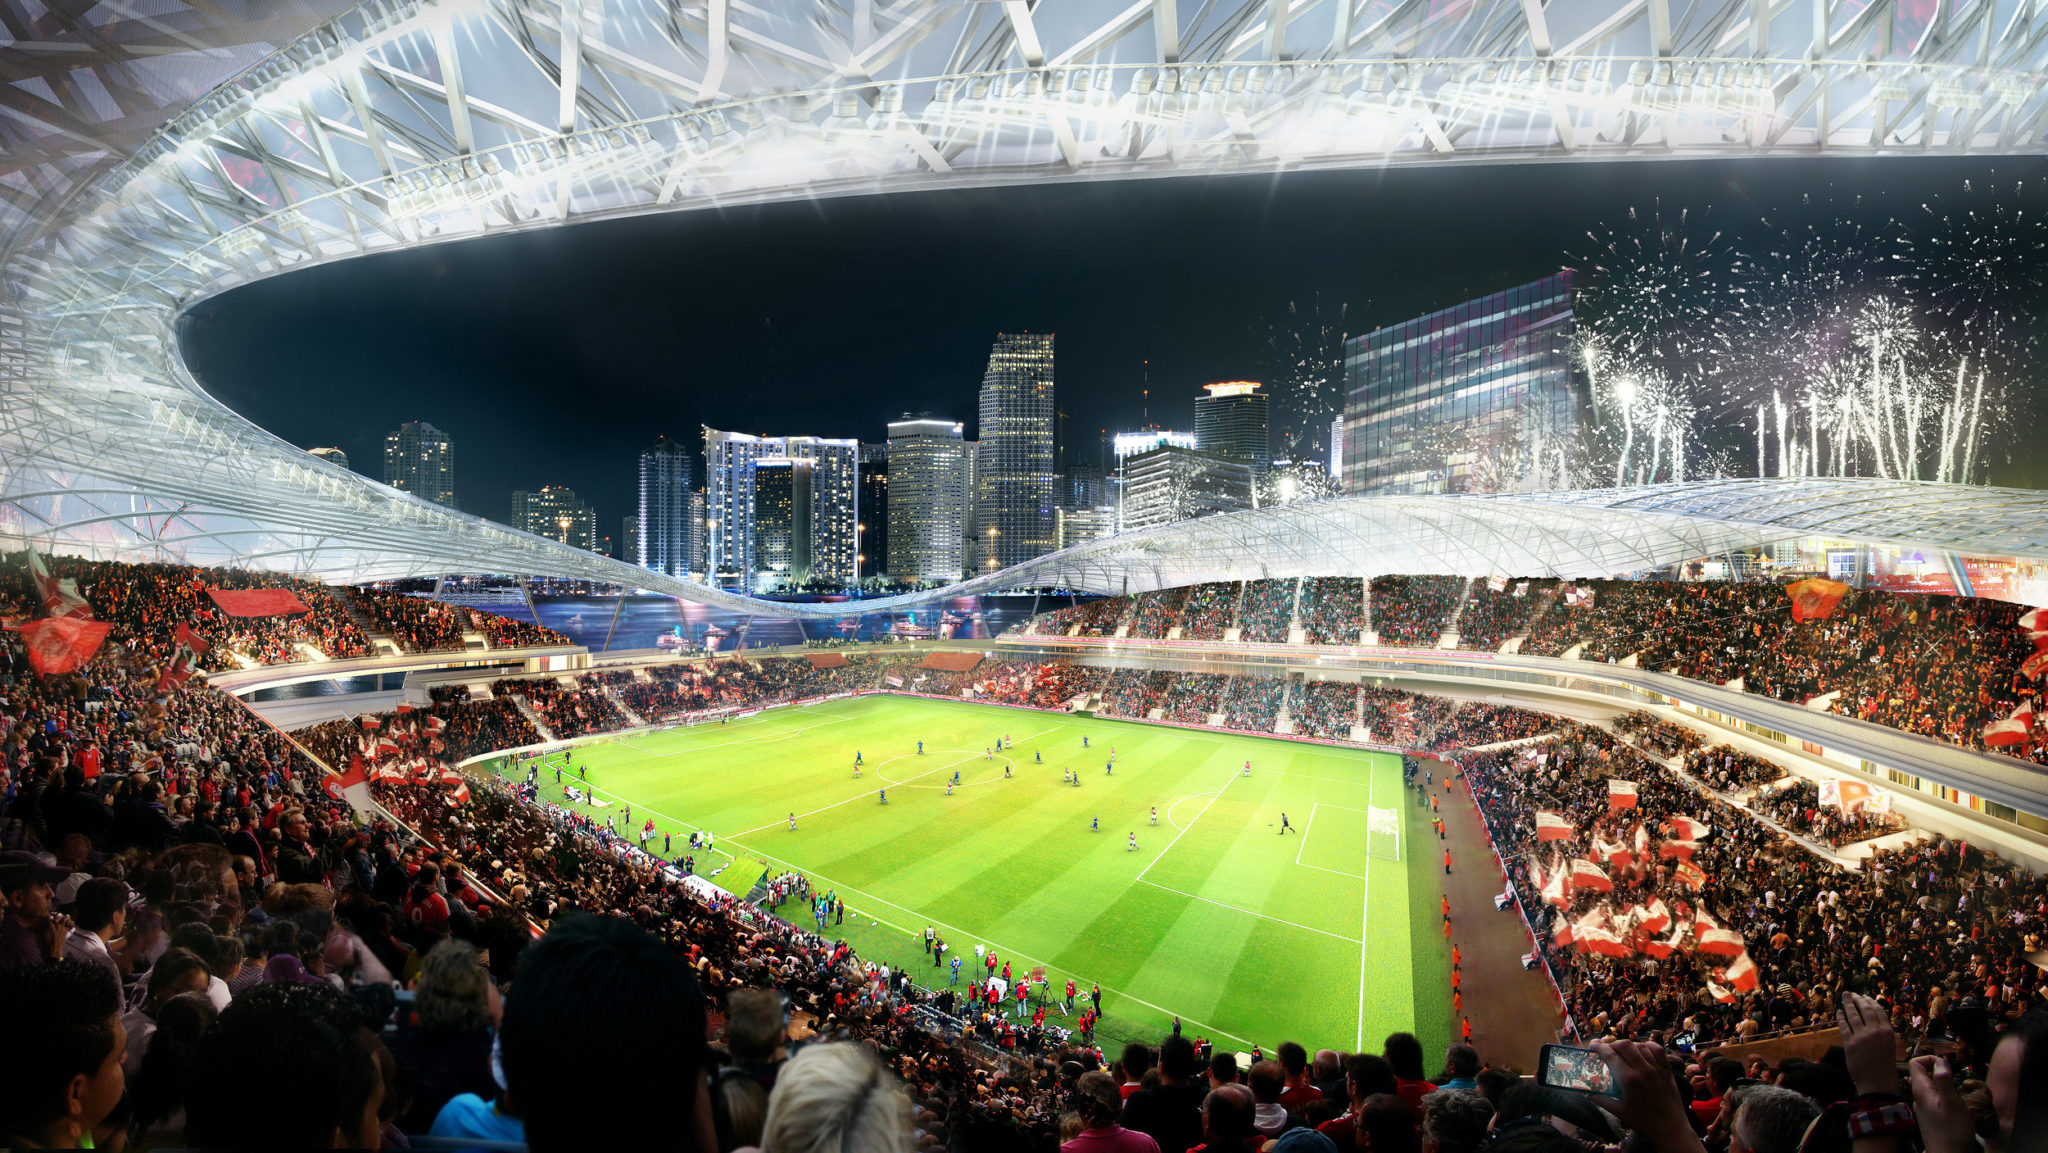 Beckham And Associates Near Final Approval for MLS Franchise in Miami